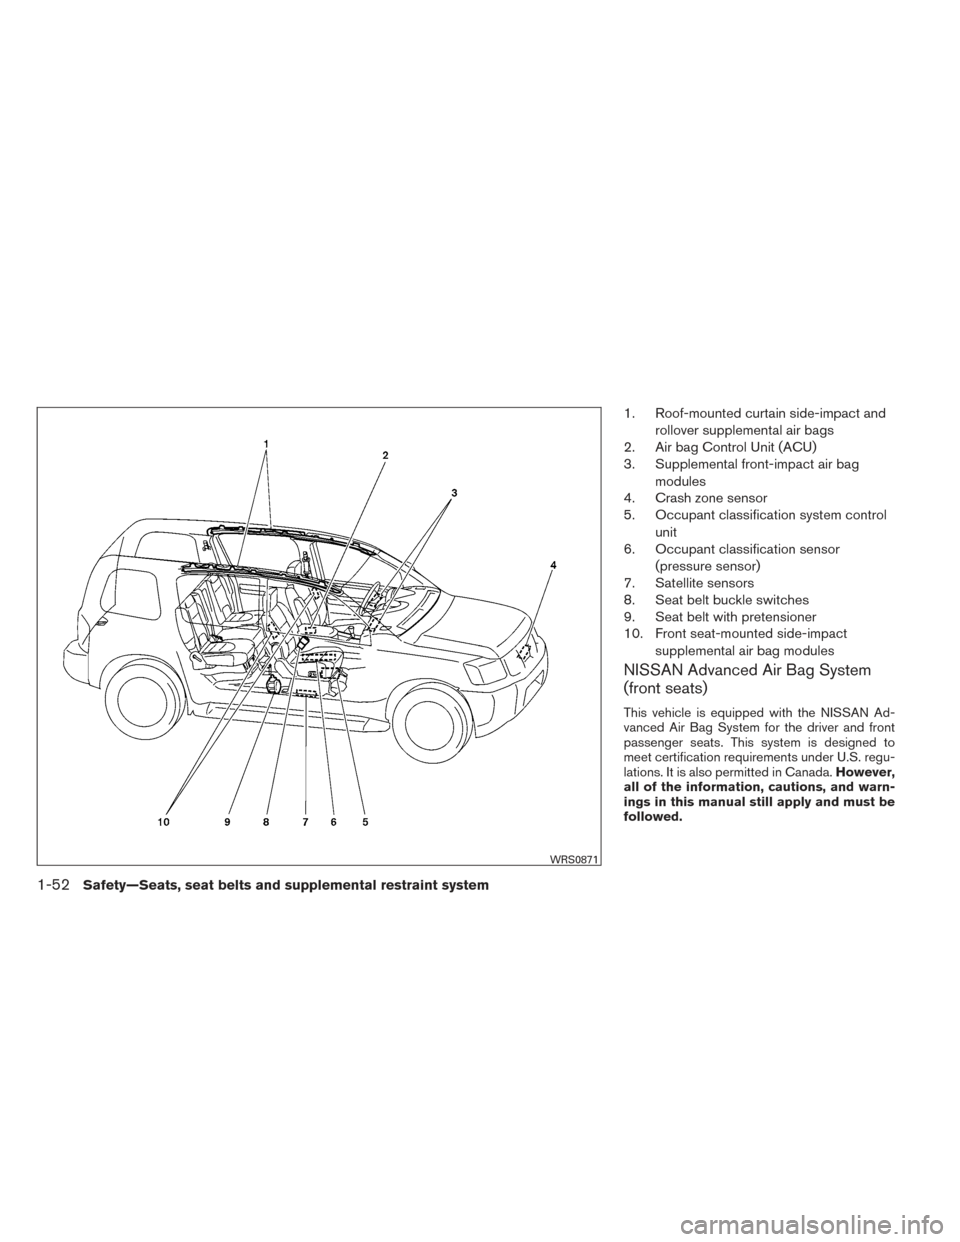 NISSAN XTERRA 2014 N50 / 2.G Owners Manual 1. Roof-mounted curtain side-impact androllover supplemental air bags
2. Air bag Control Unit (ACU)
3. Supplemental front-impact air bag
modules
4. Crash zone sensor
5. Occupant classification system 